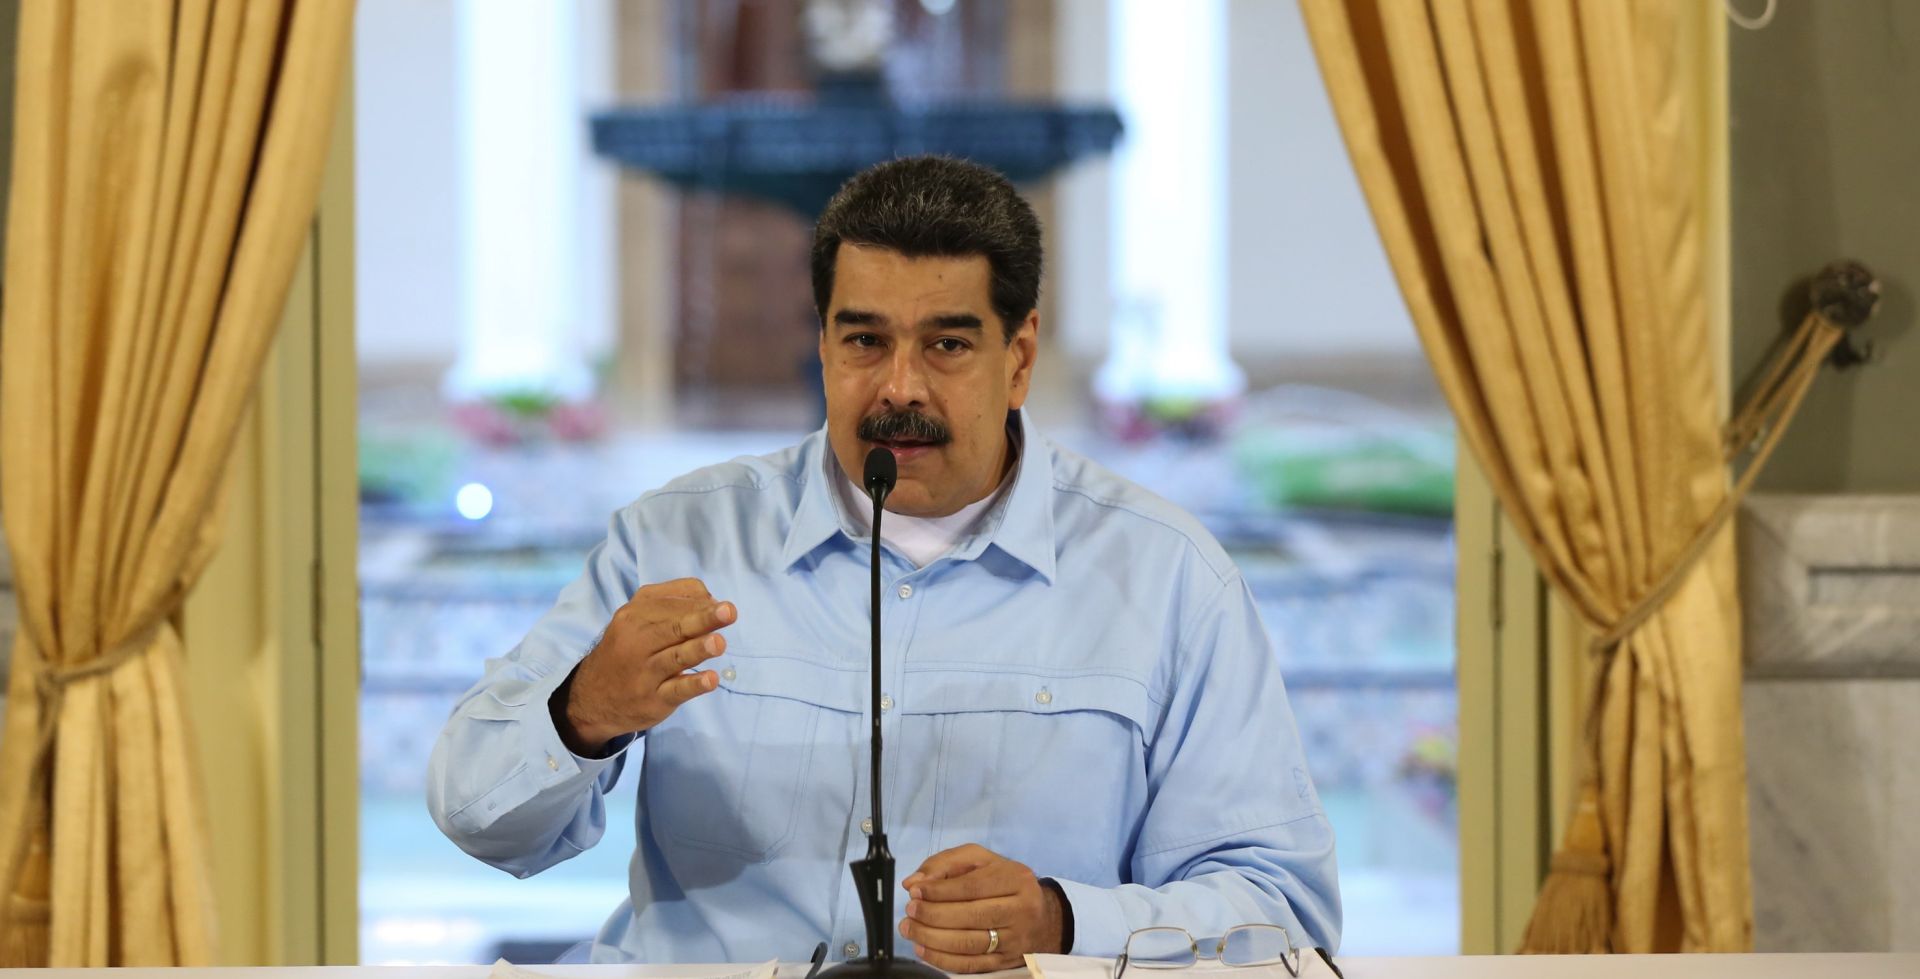 epa07616636 A handout photo made available by Miraflores' Press Office shows Venezuelan President Nicolas Maduro as he speaks during a mandatory radio and TV broadcast in Caracas, Venezuela, 31 May 2019.  EPA/MIRAFLORES PRESS OFFICE/JHONN ZERPA HANDOUT  HANDOUT EDITORIAL USE ONLY/NO SALES